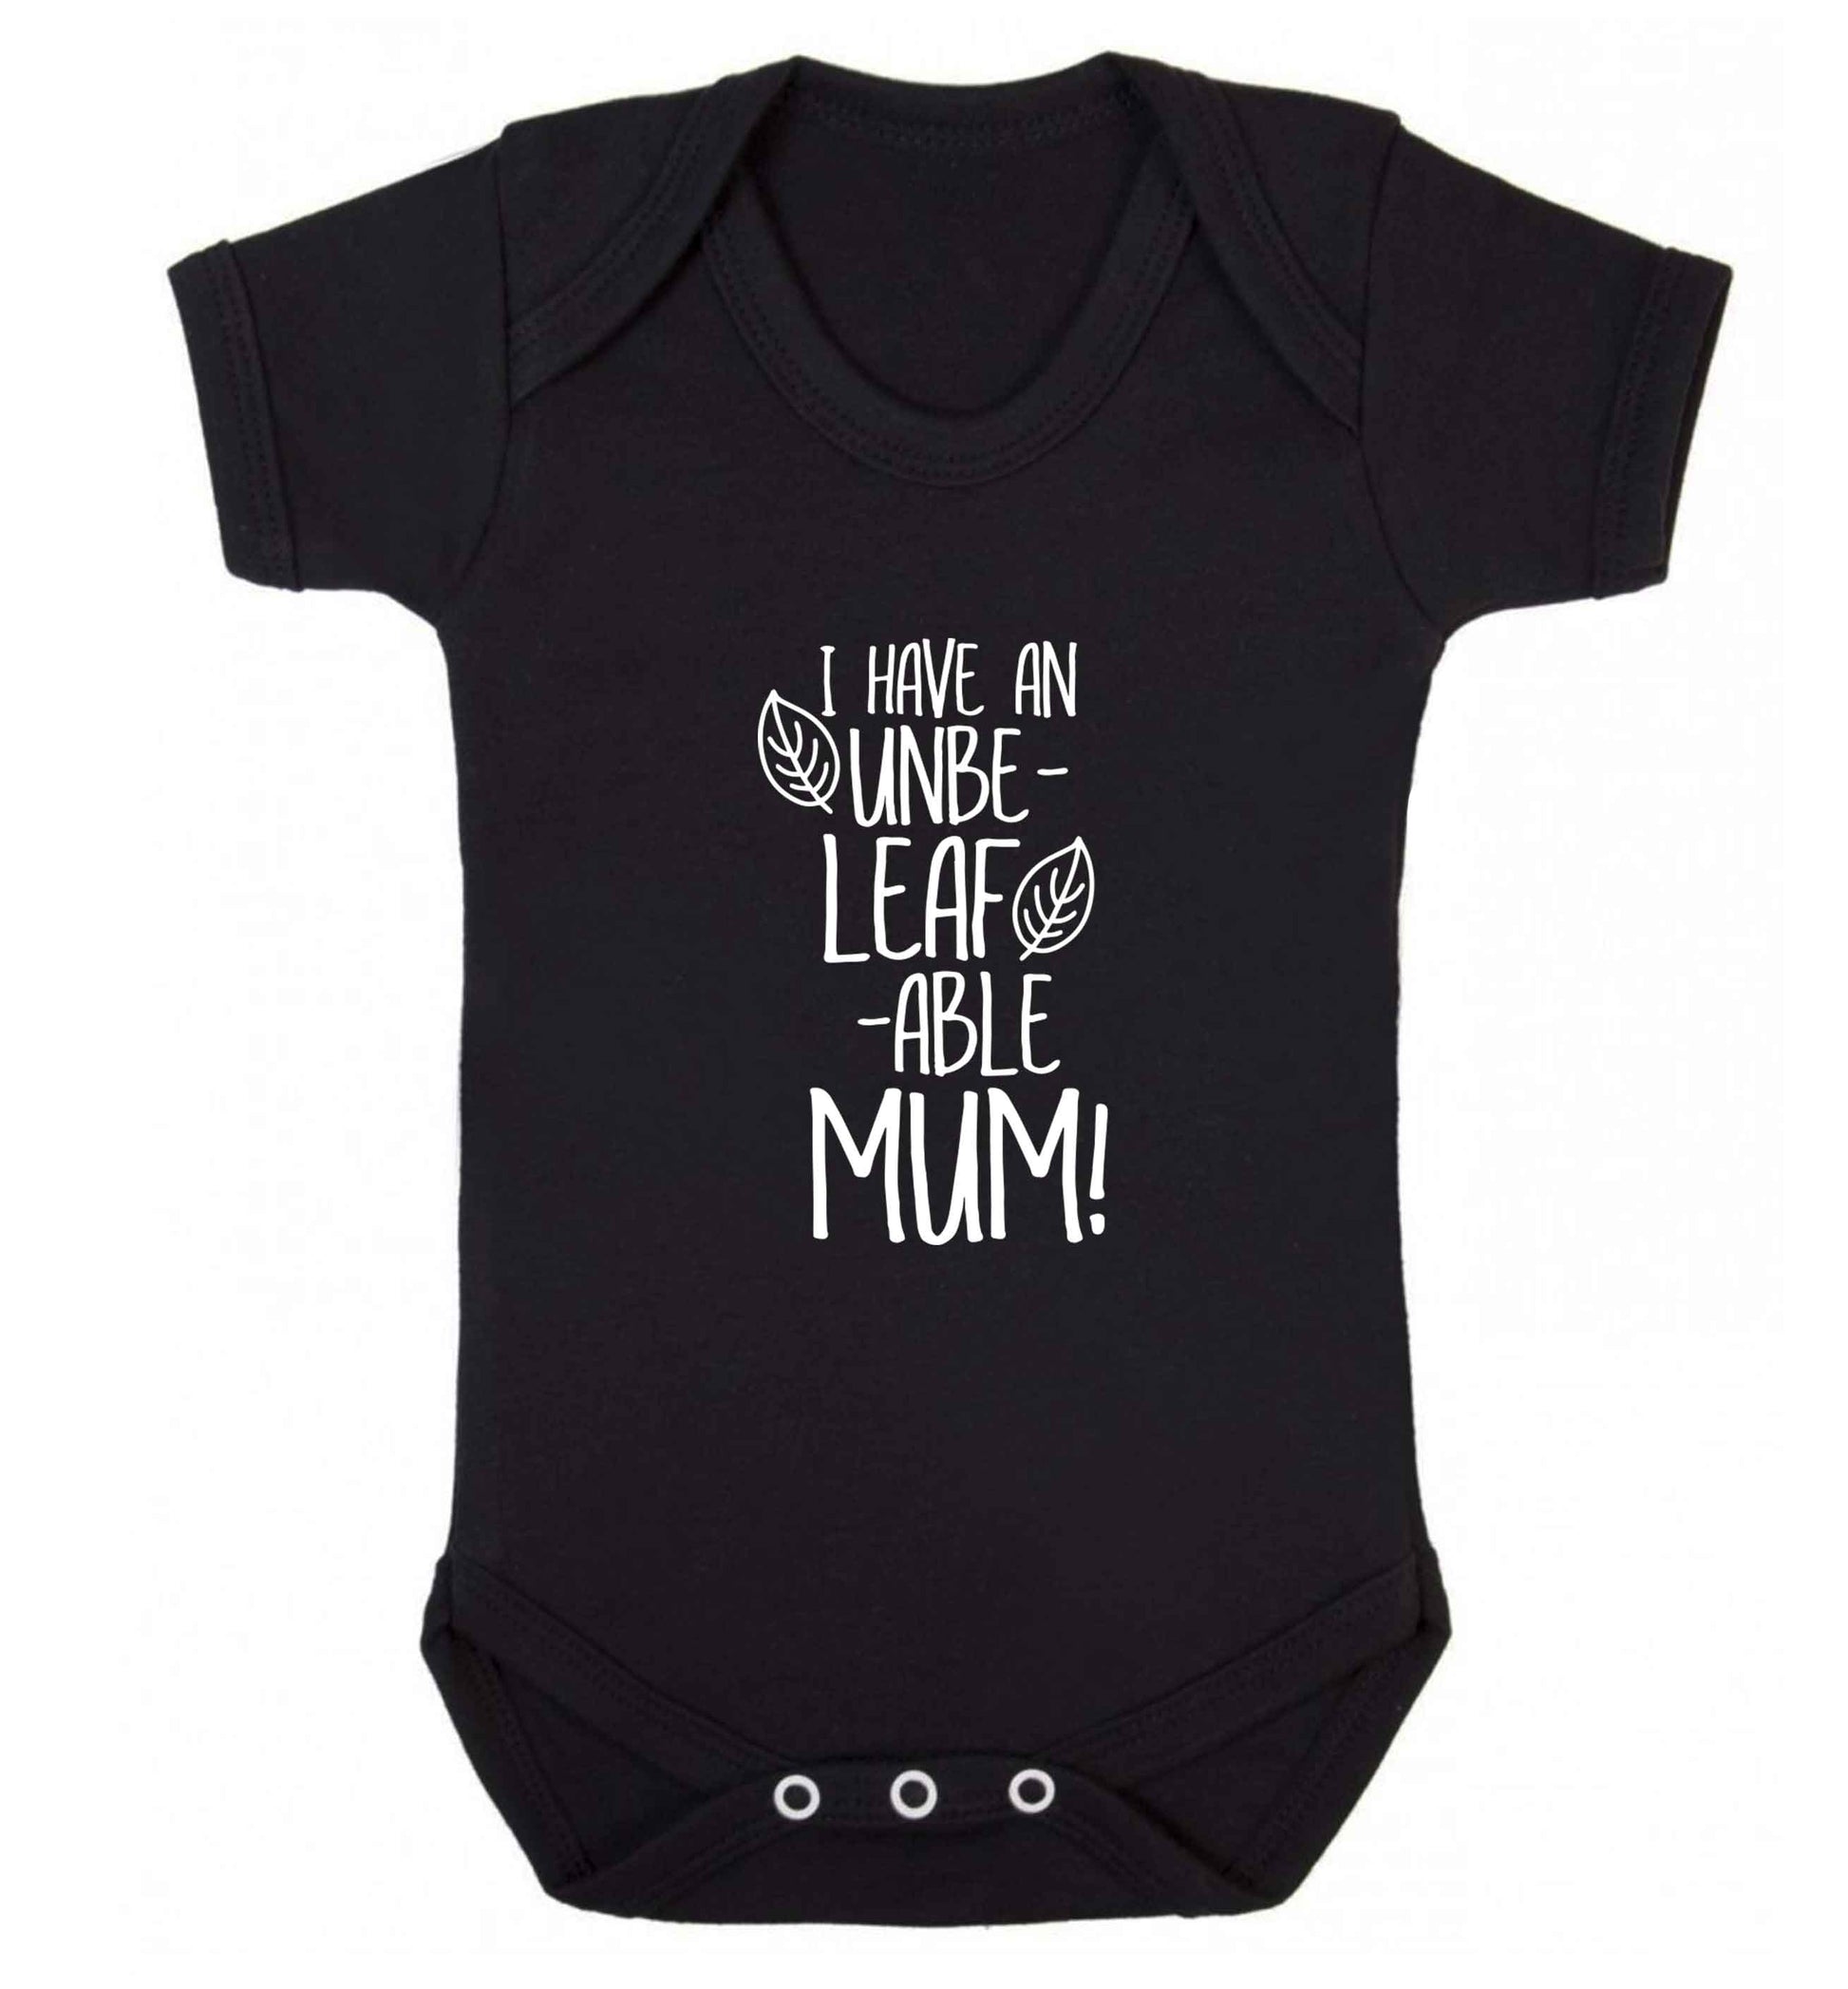 I have an unbeleafable mum! baby vest black 18-24 months